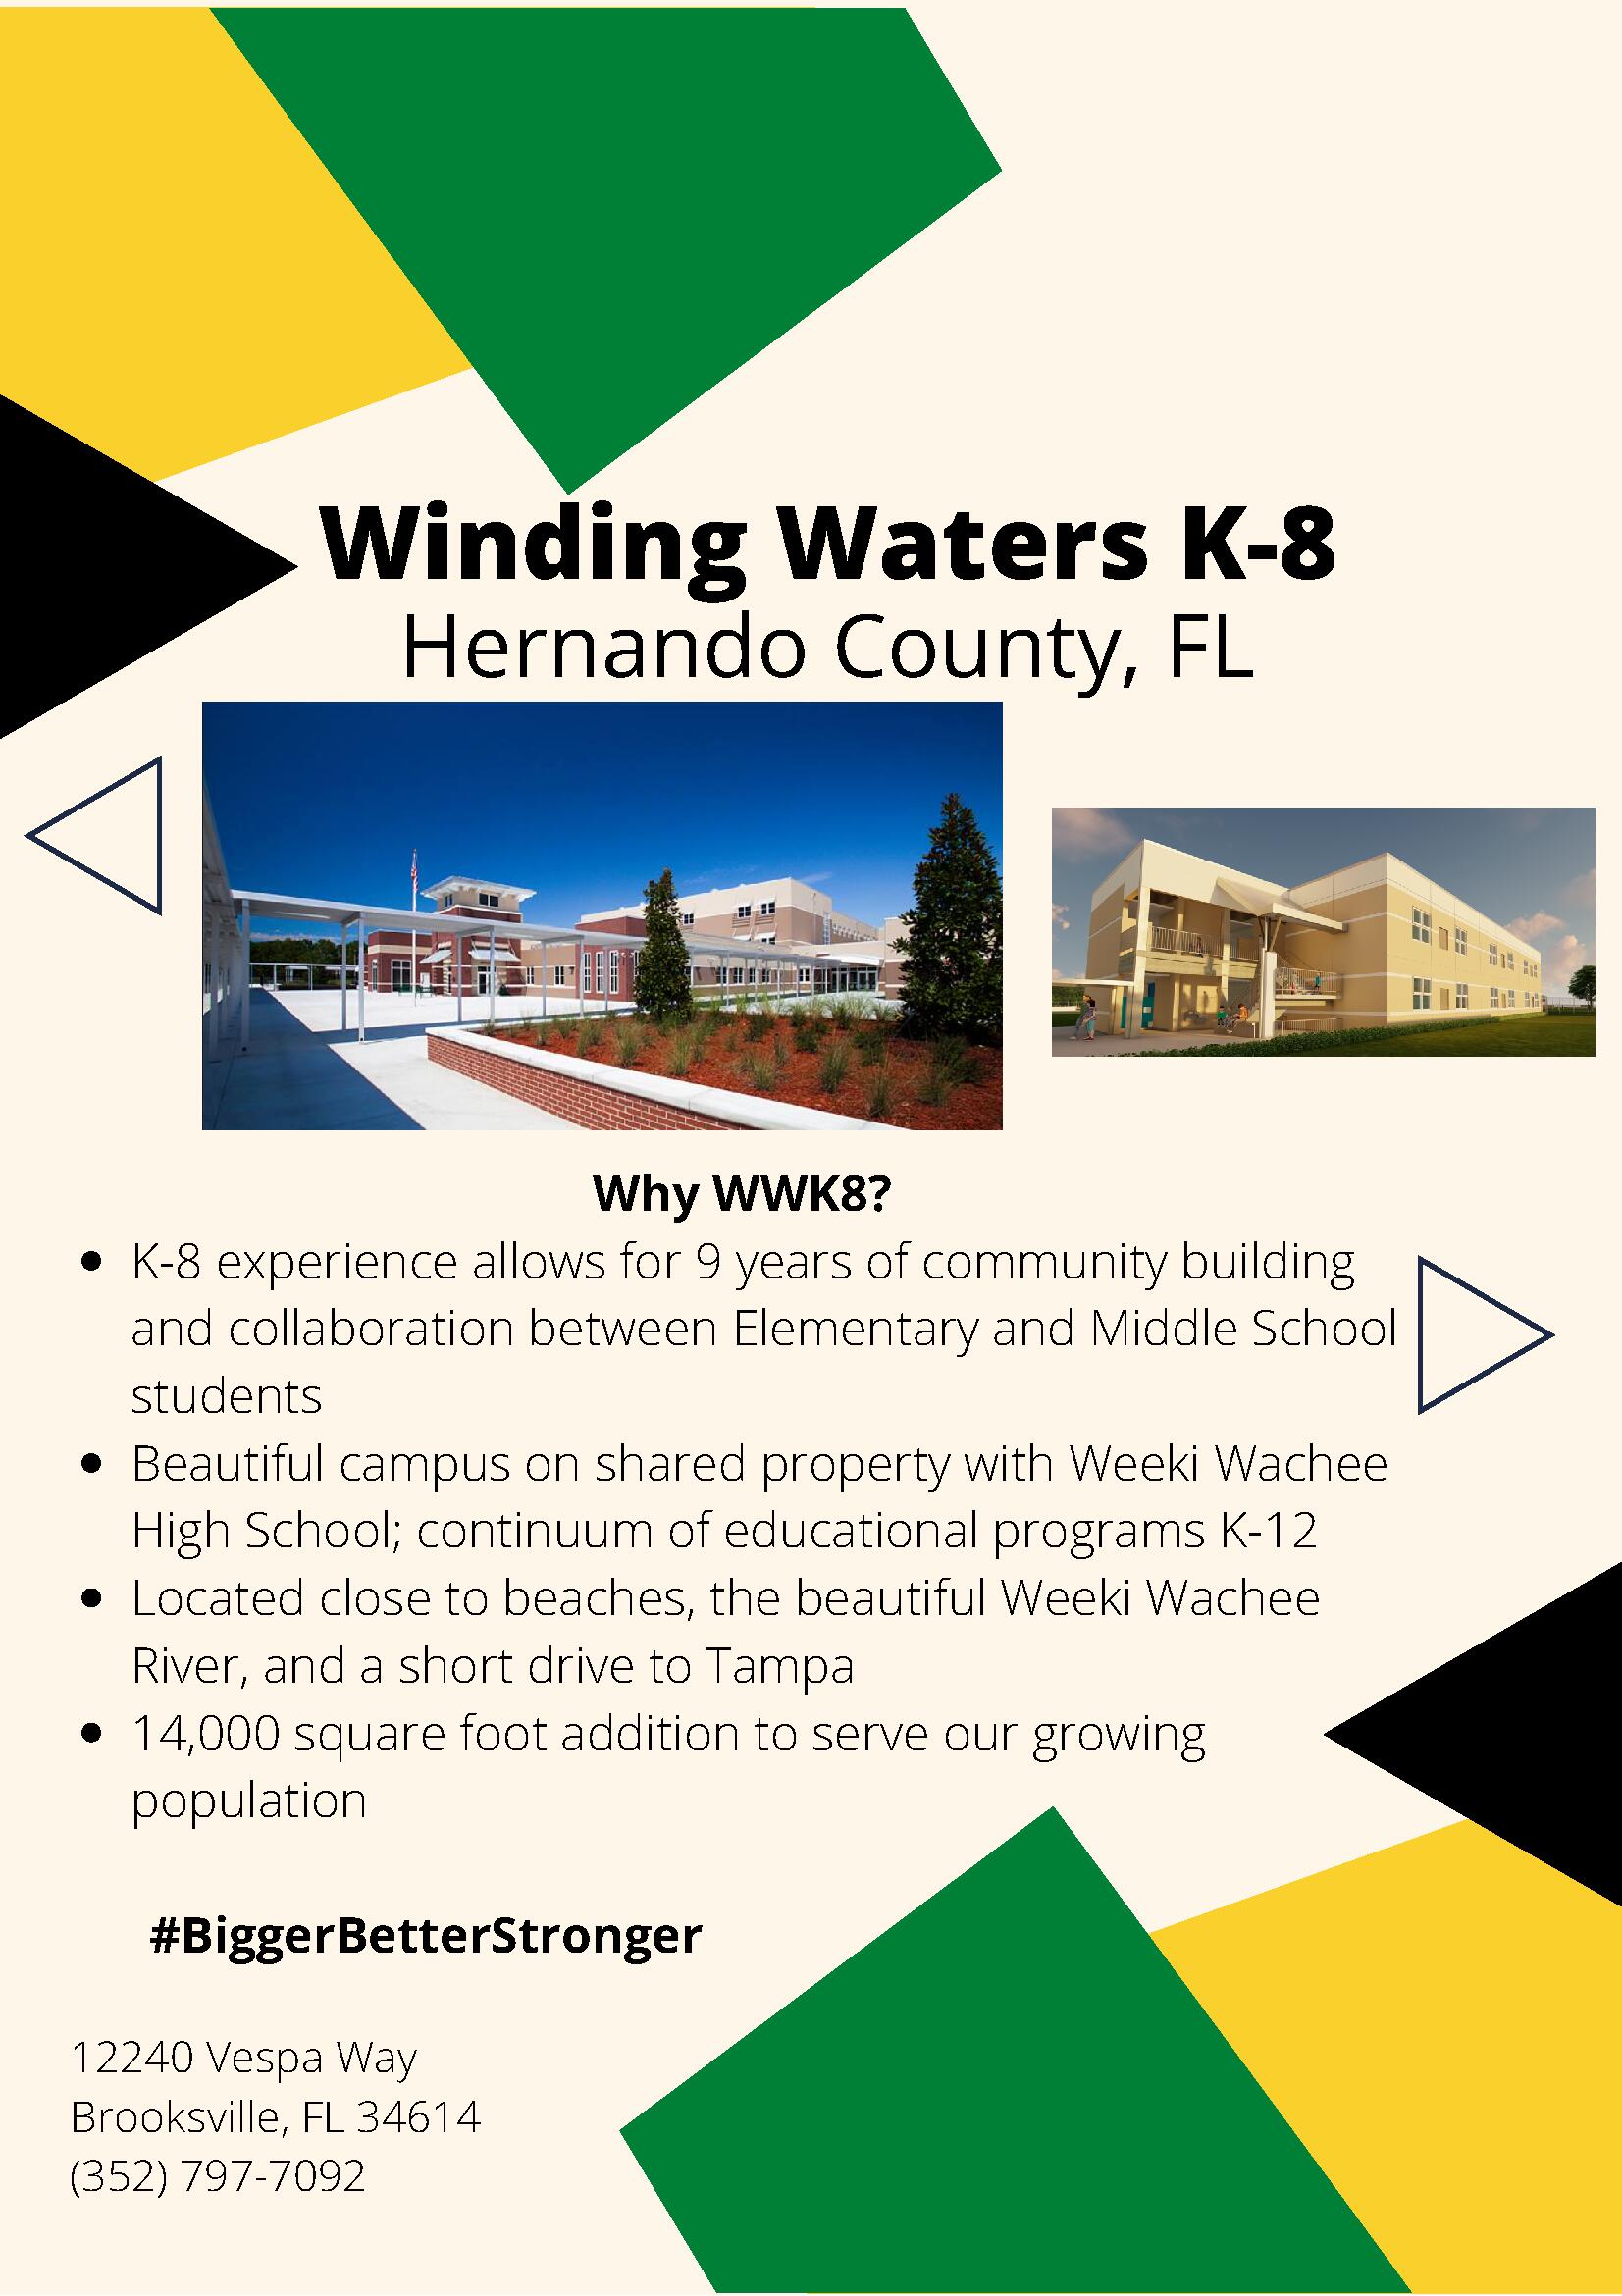 Information on the Winding Waters School